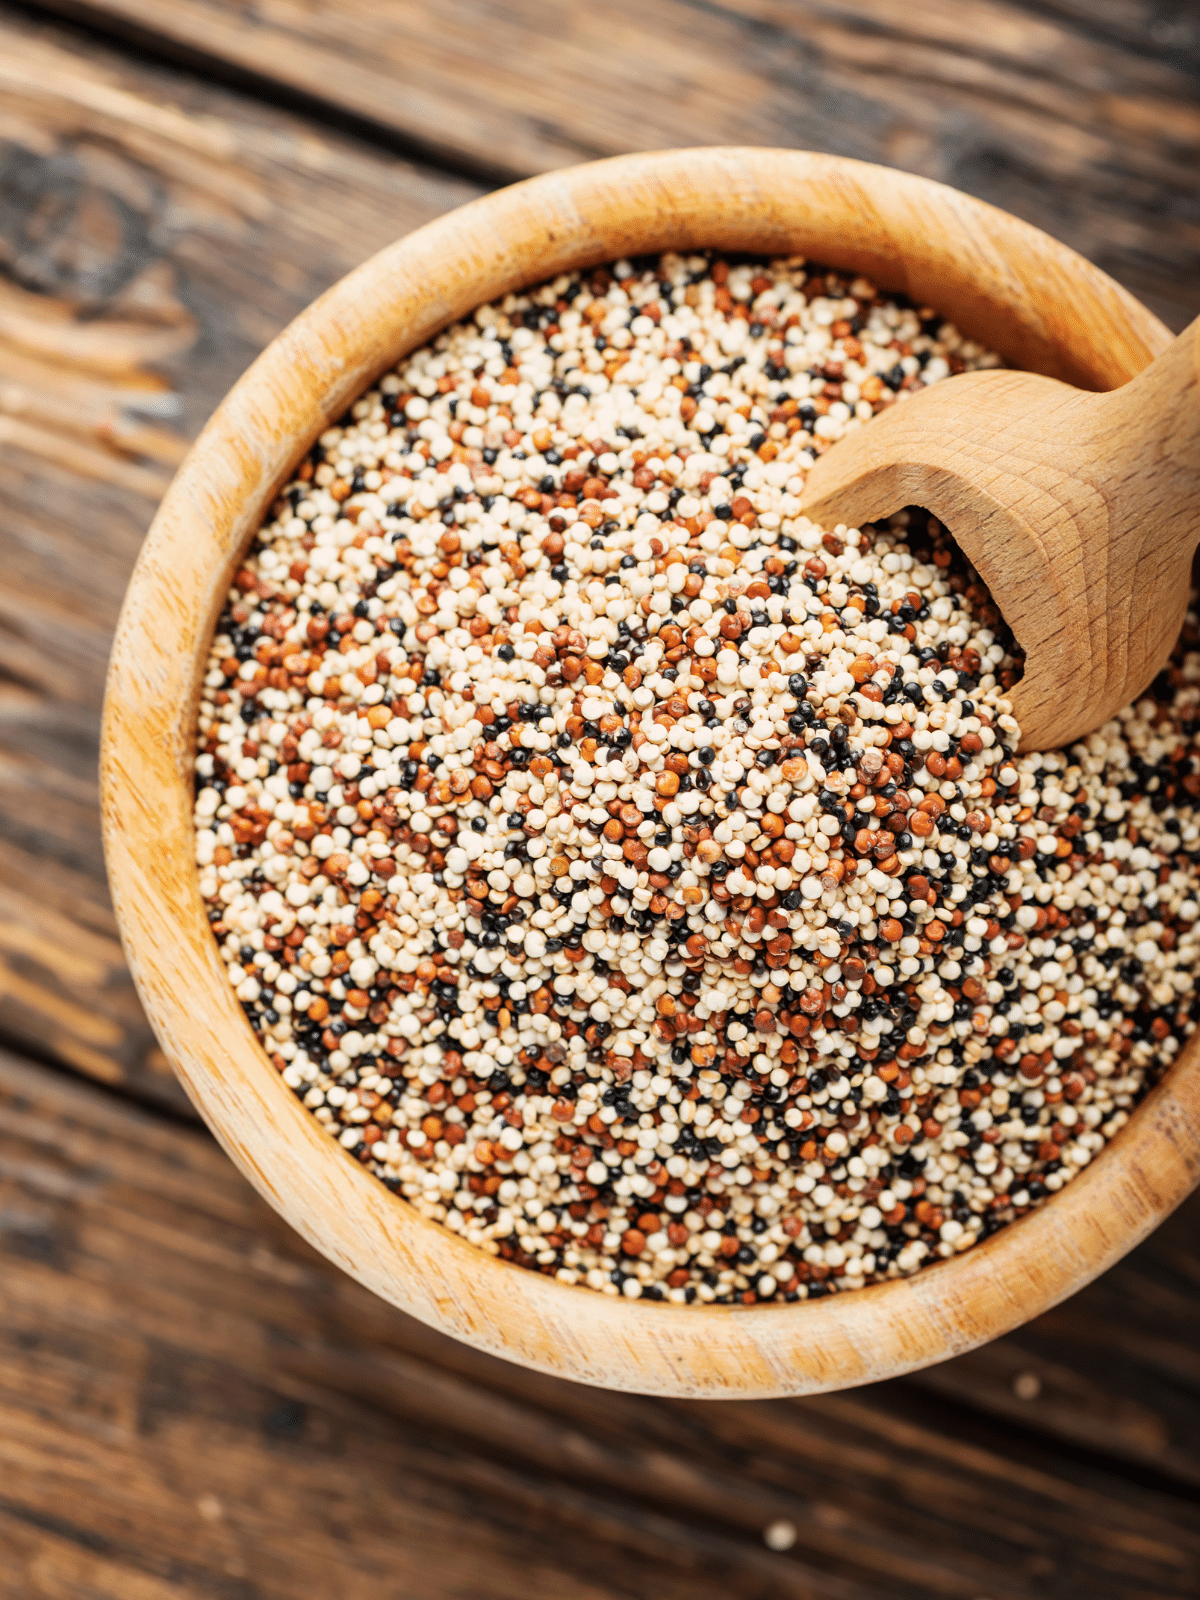 Quinoa in a wooden bowl with scoop in it on a wooden table.